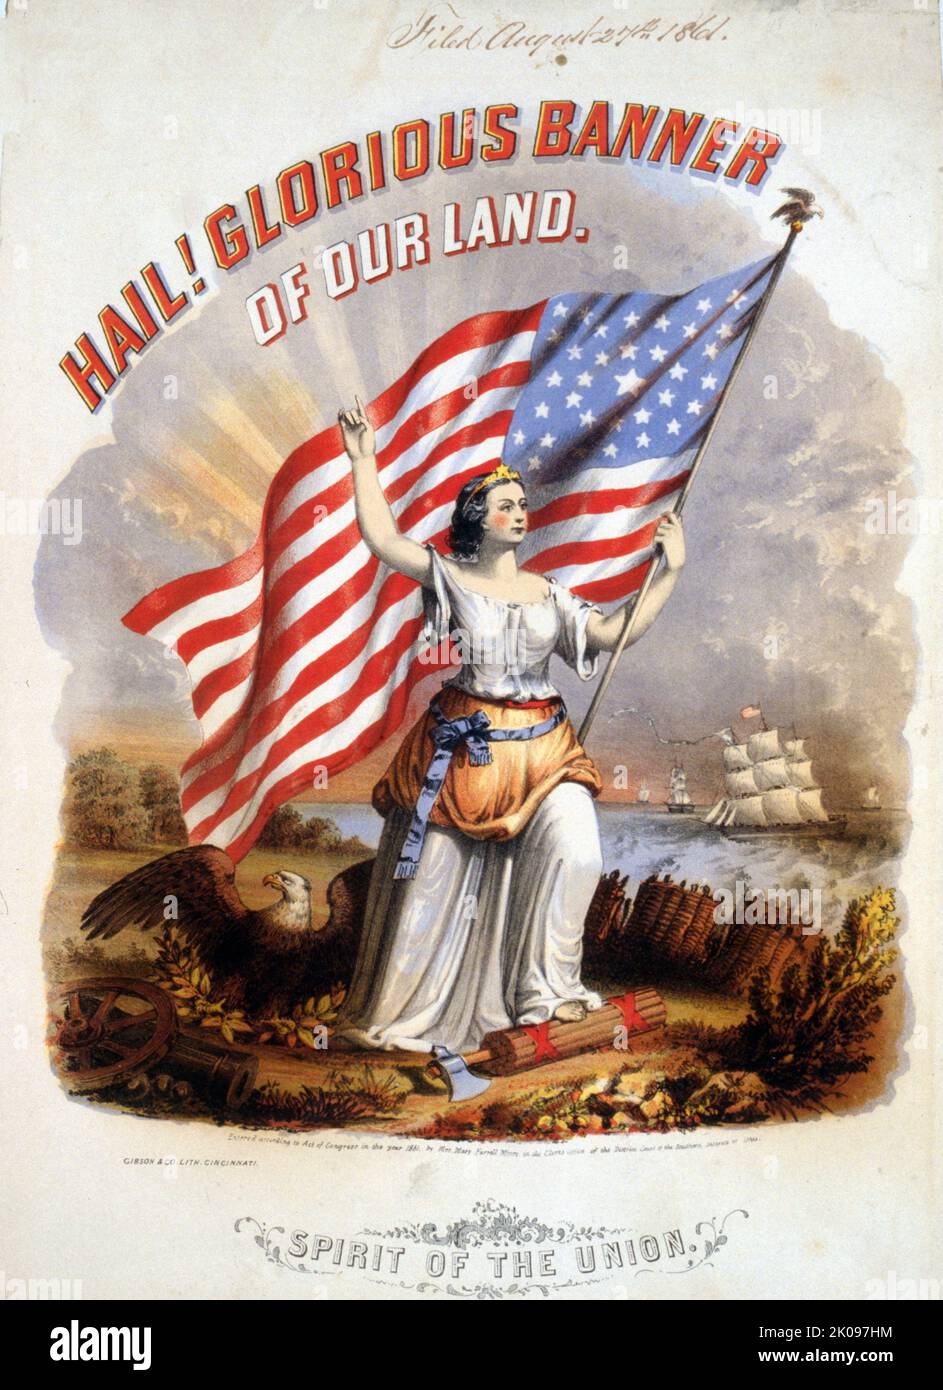 Hail! Glorious banner of our land. Spirit of the Union/Gibson & Co. lith., Cincinnati. Patriotic music cover showing woman holding U.S. flag. Stock Photo